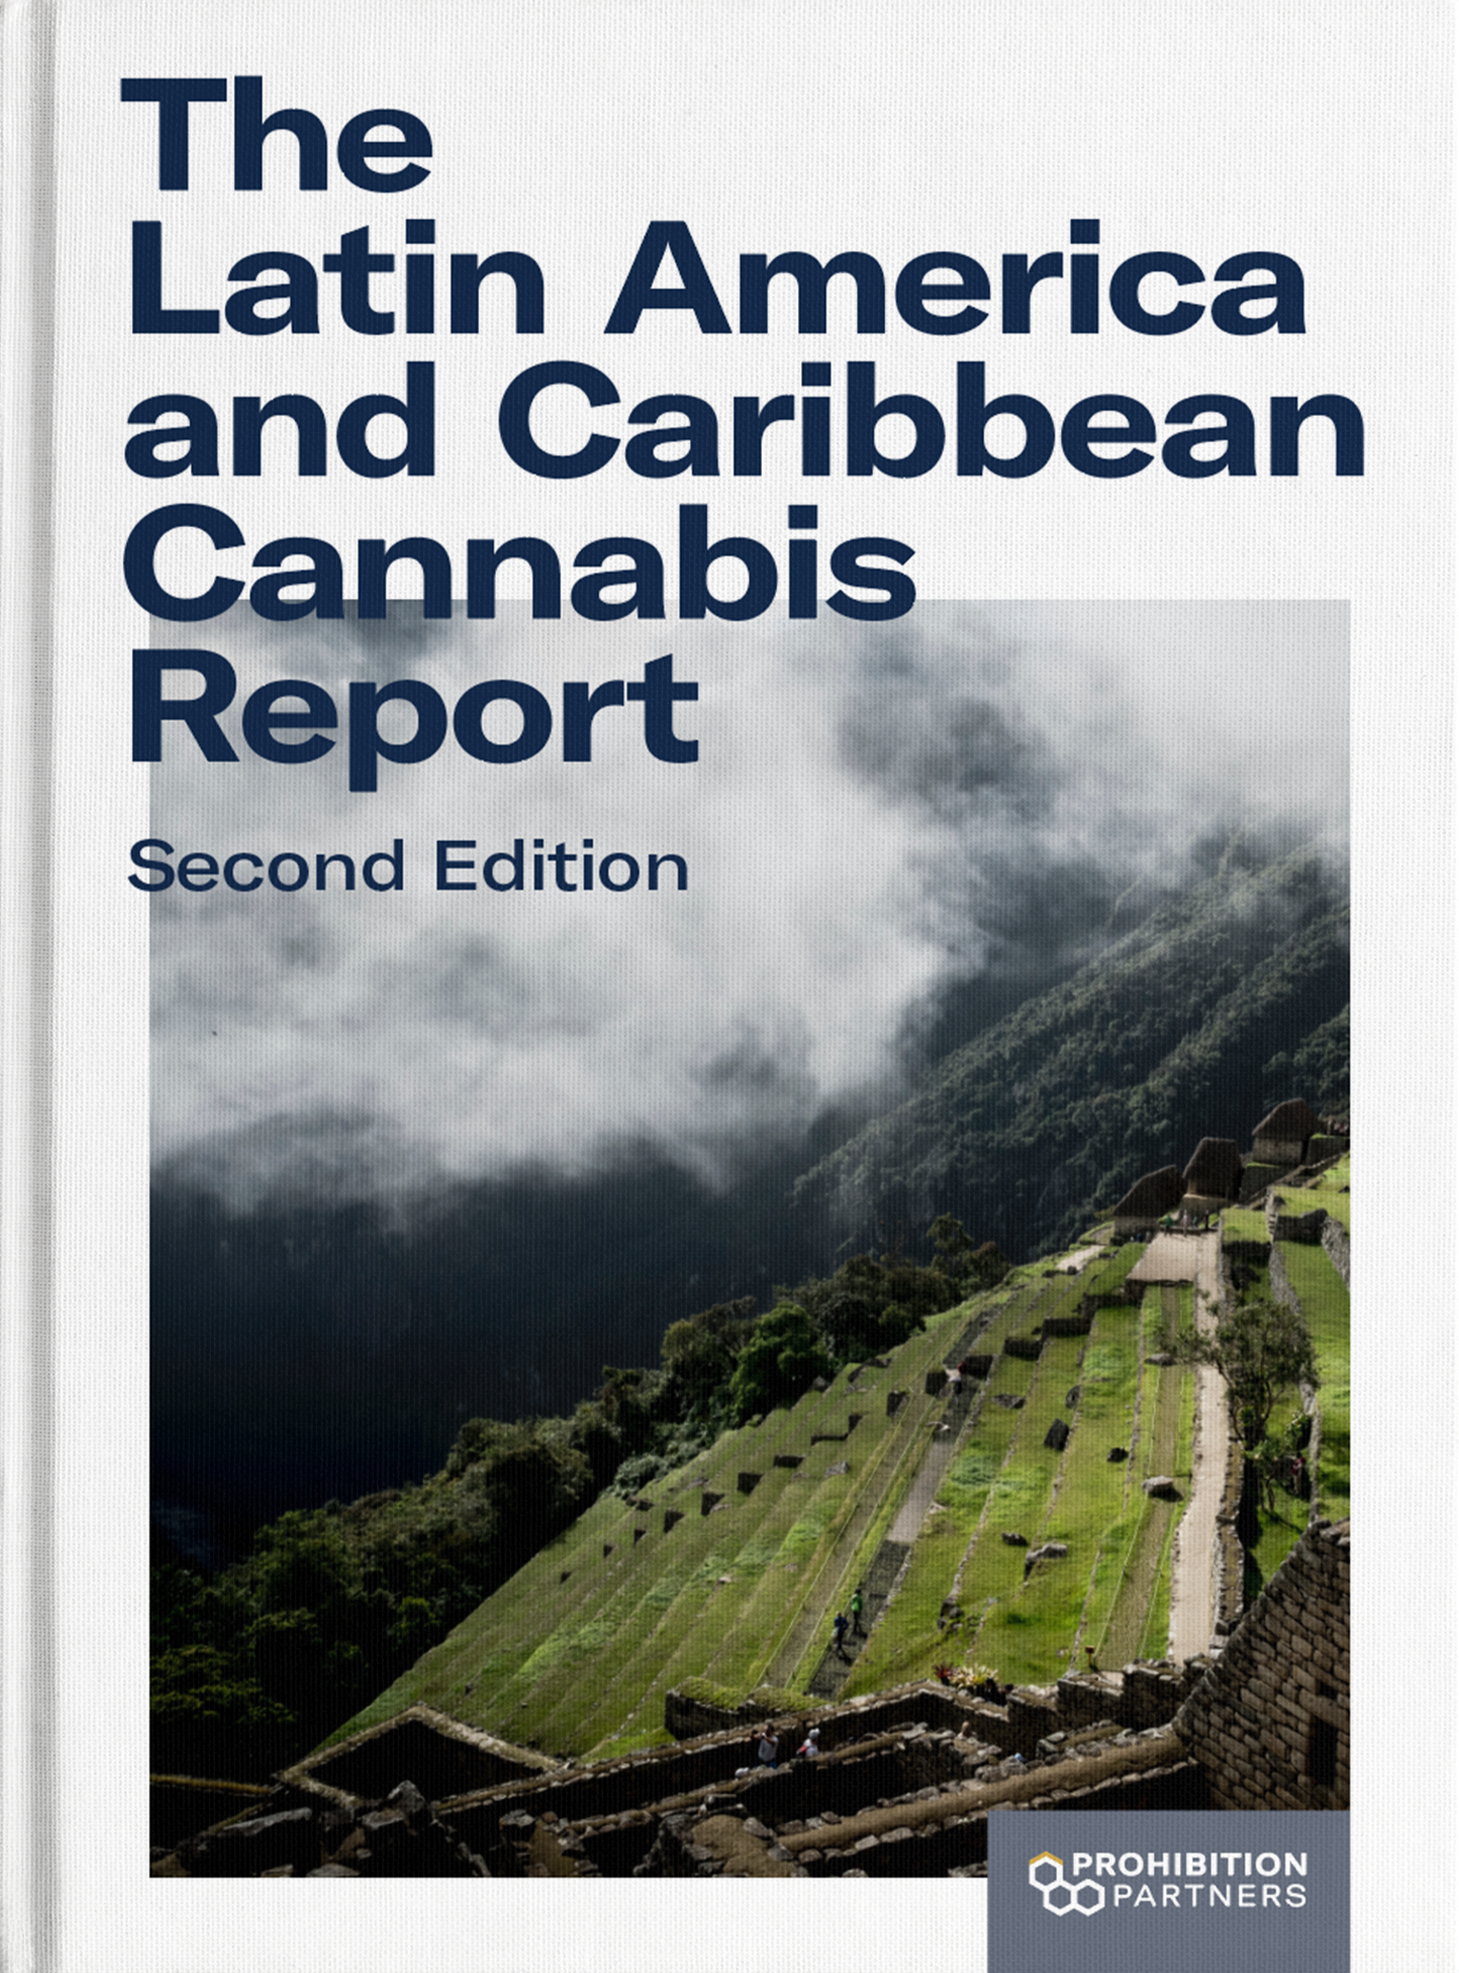 The Latin America and Caribbean Cannabis Report Second Edition | Prohibition Partners